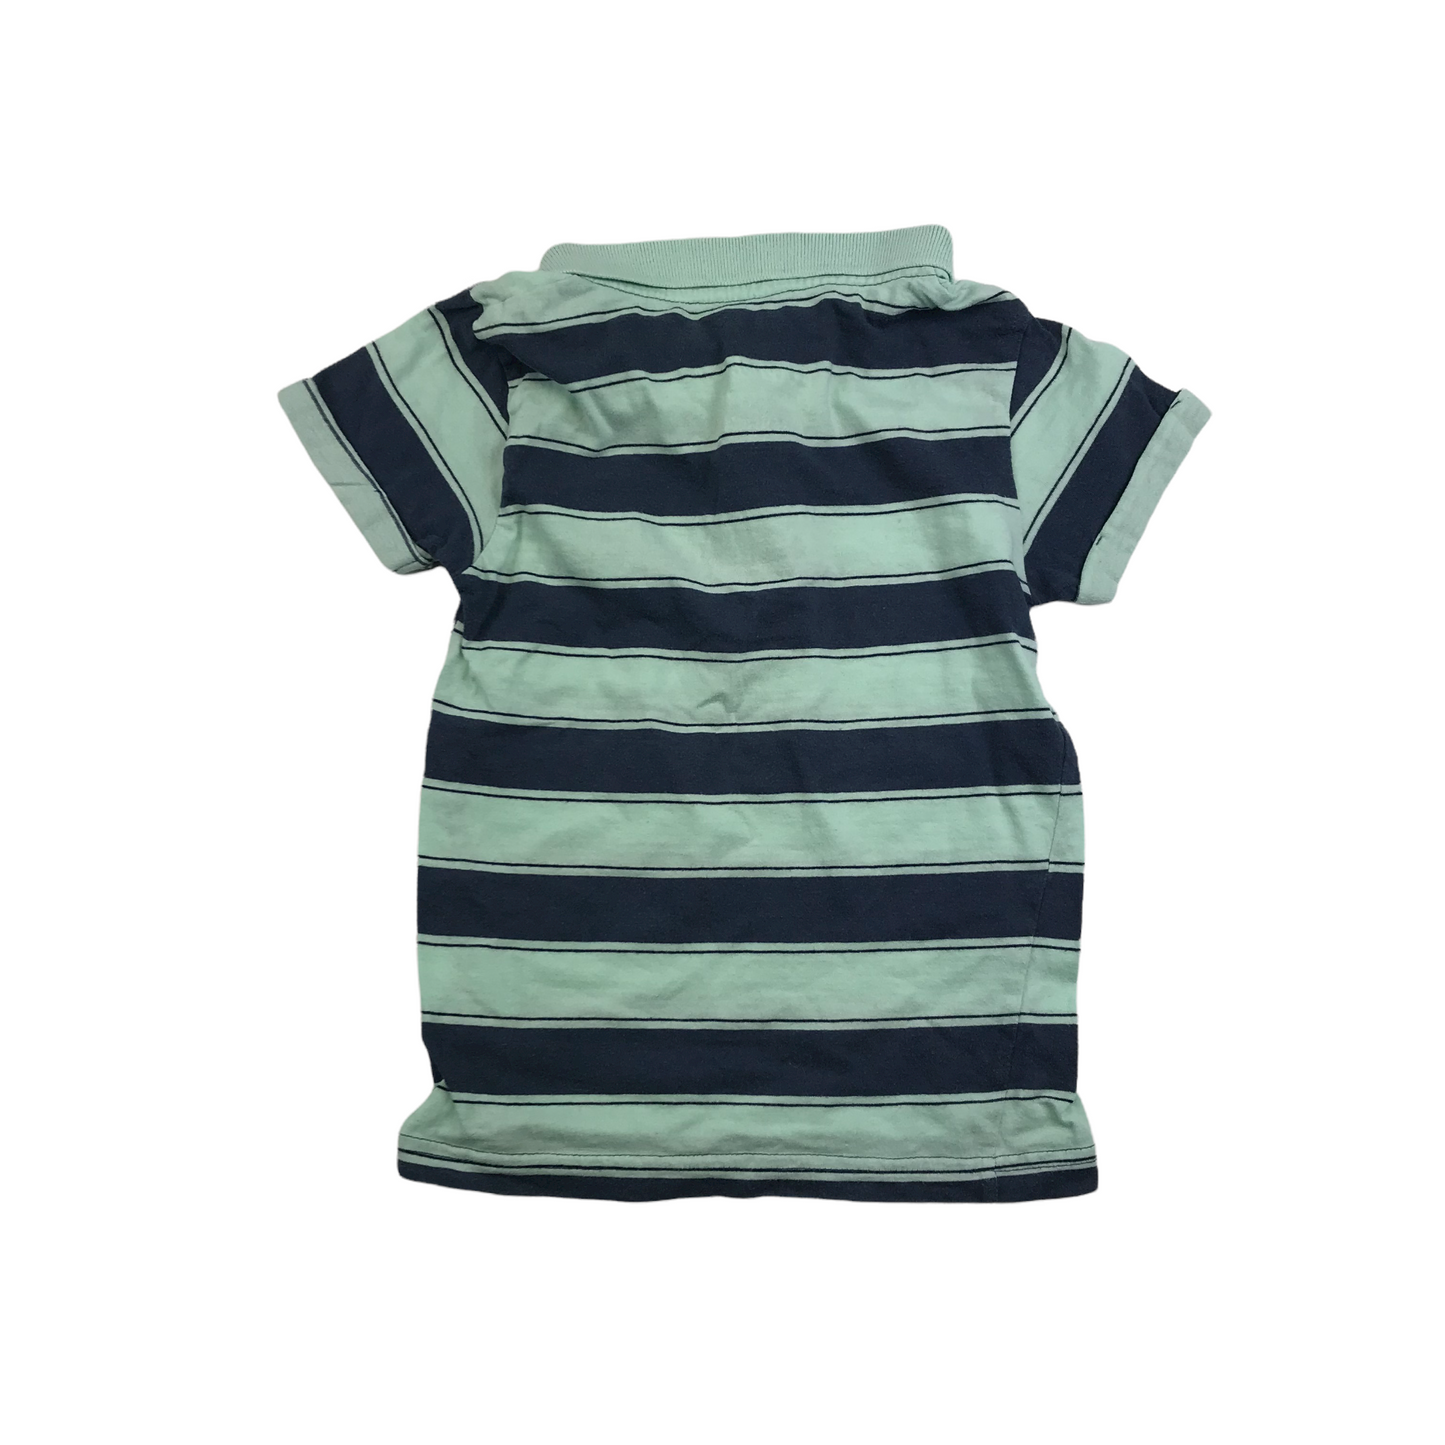 Primark Navy and Mint Stripy Polo Shirt Age 4